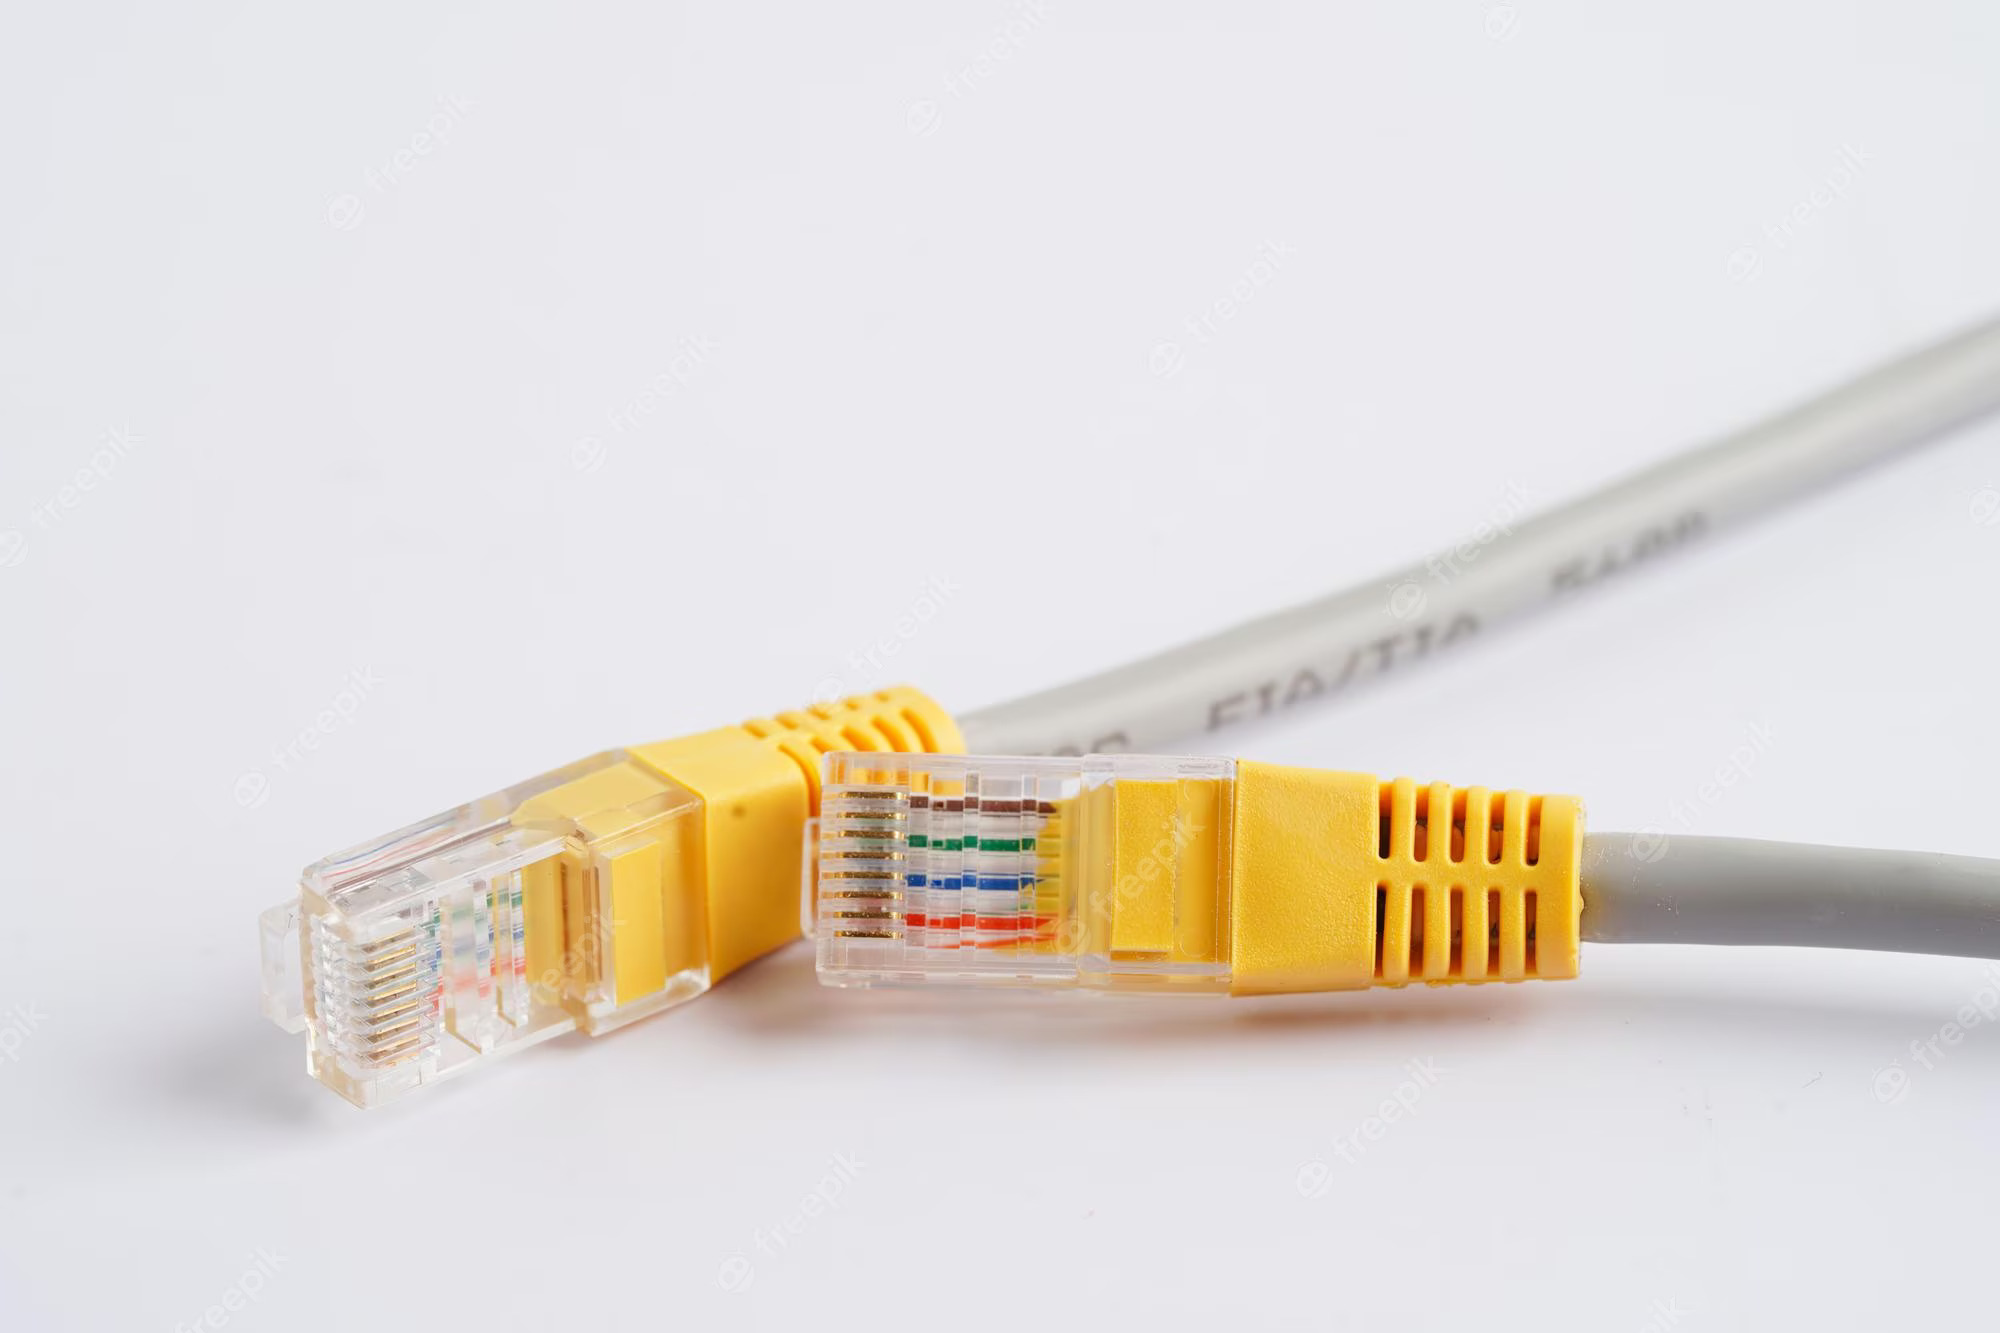 what-is-the-name-of-the-connector-used-on-a-network-cable